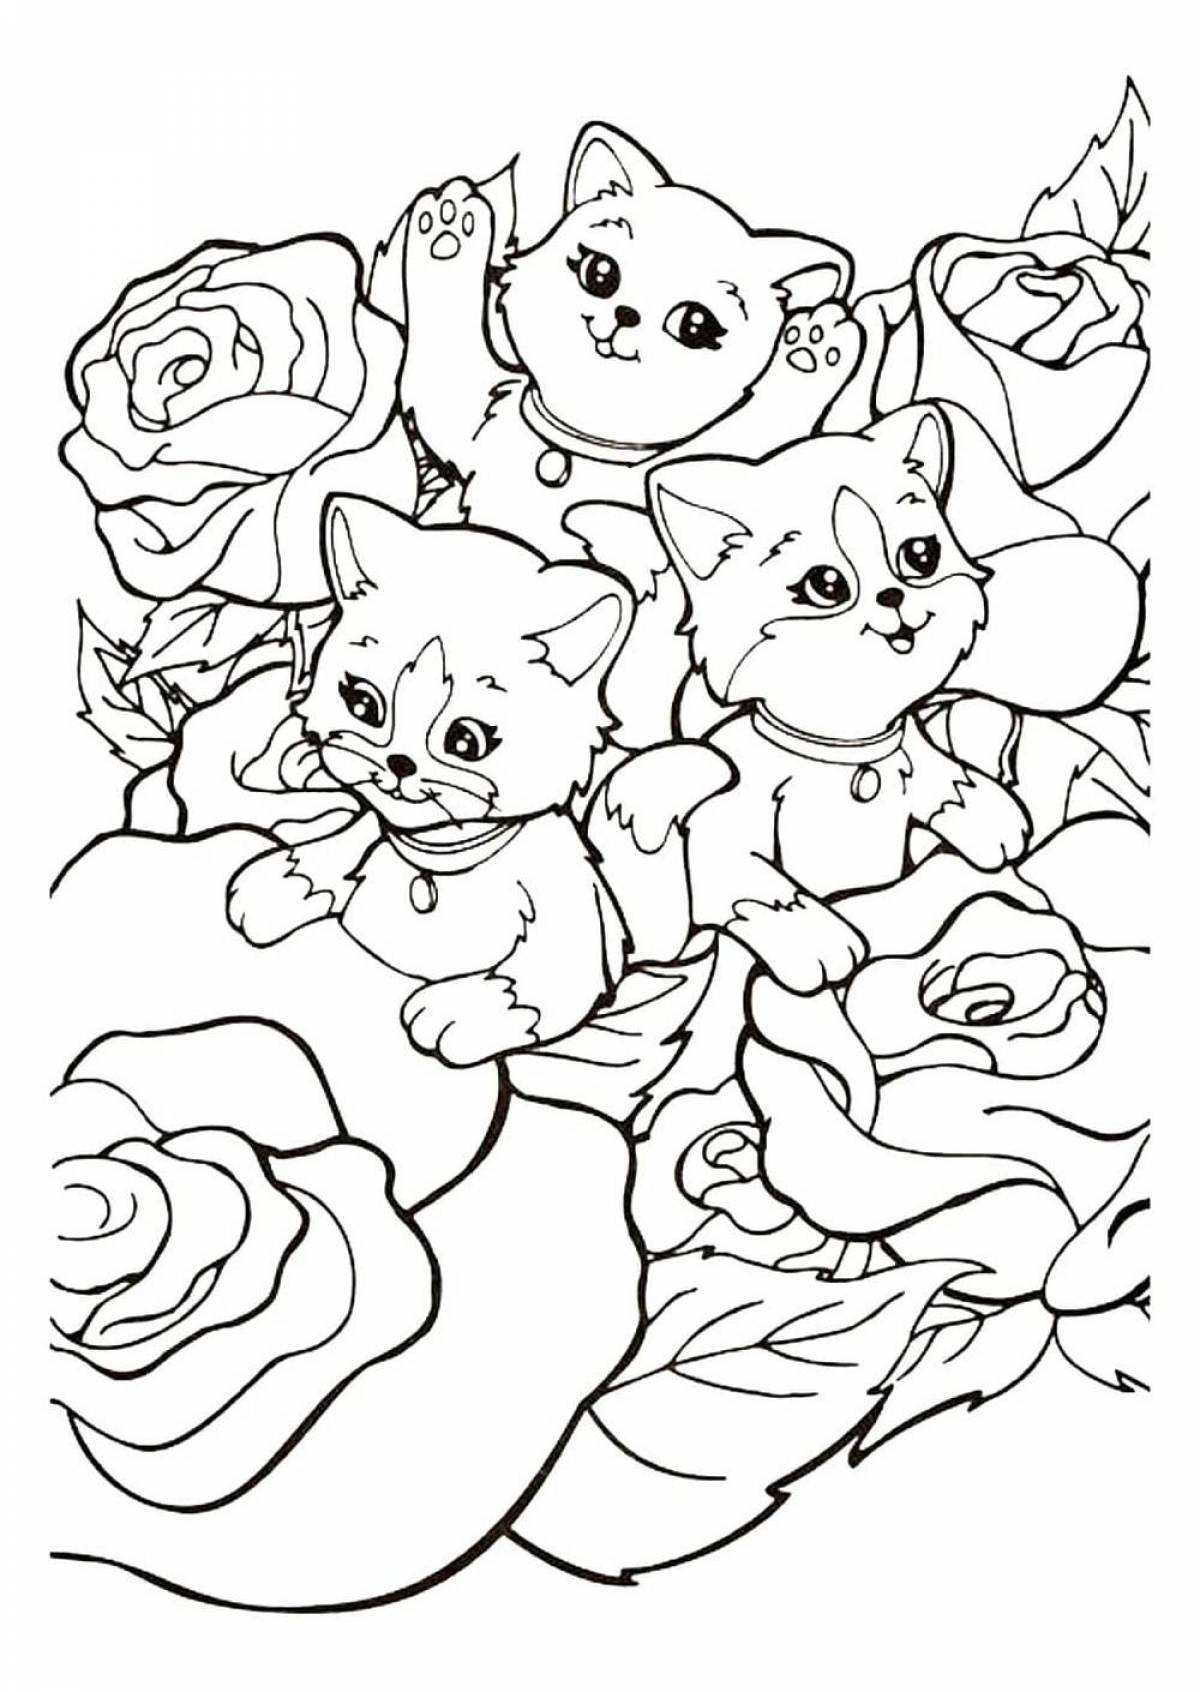 Fun coloring cat with kittens